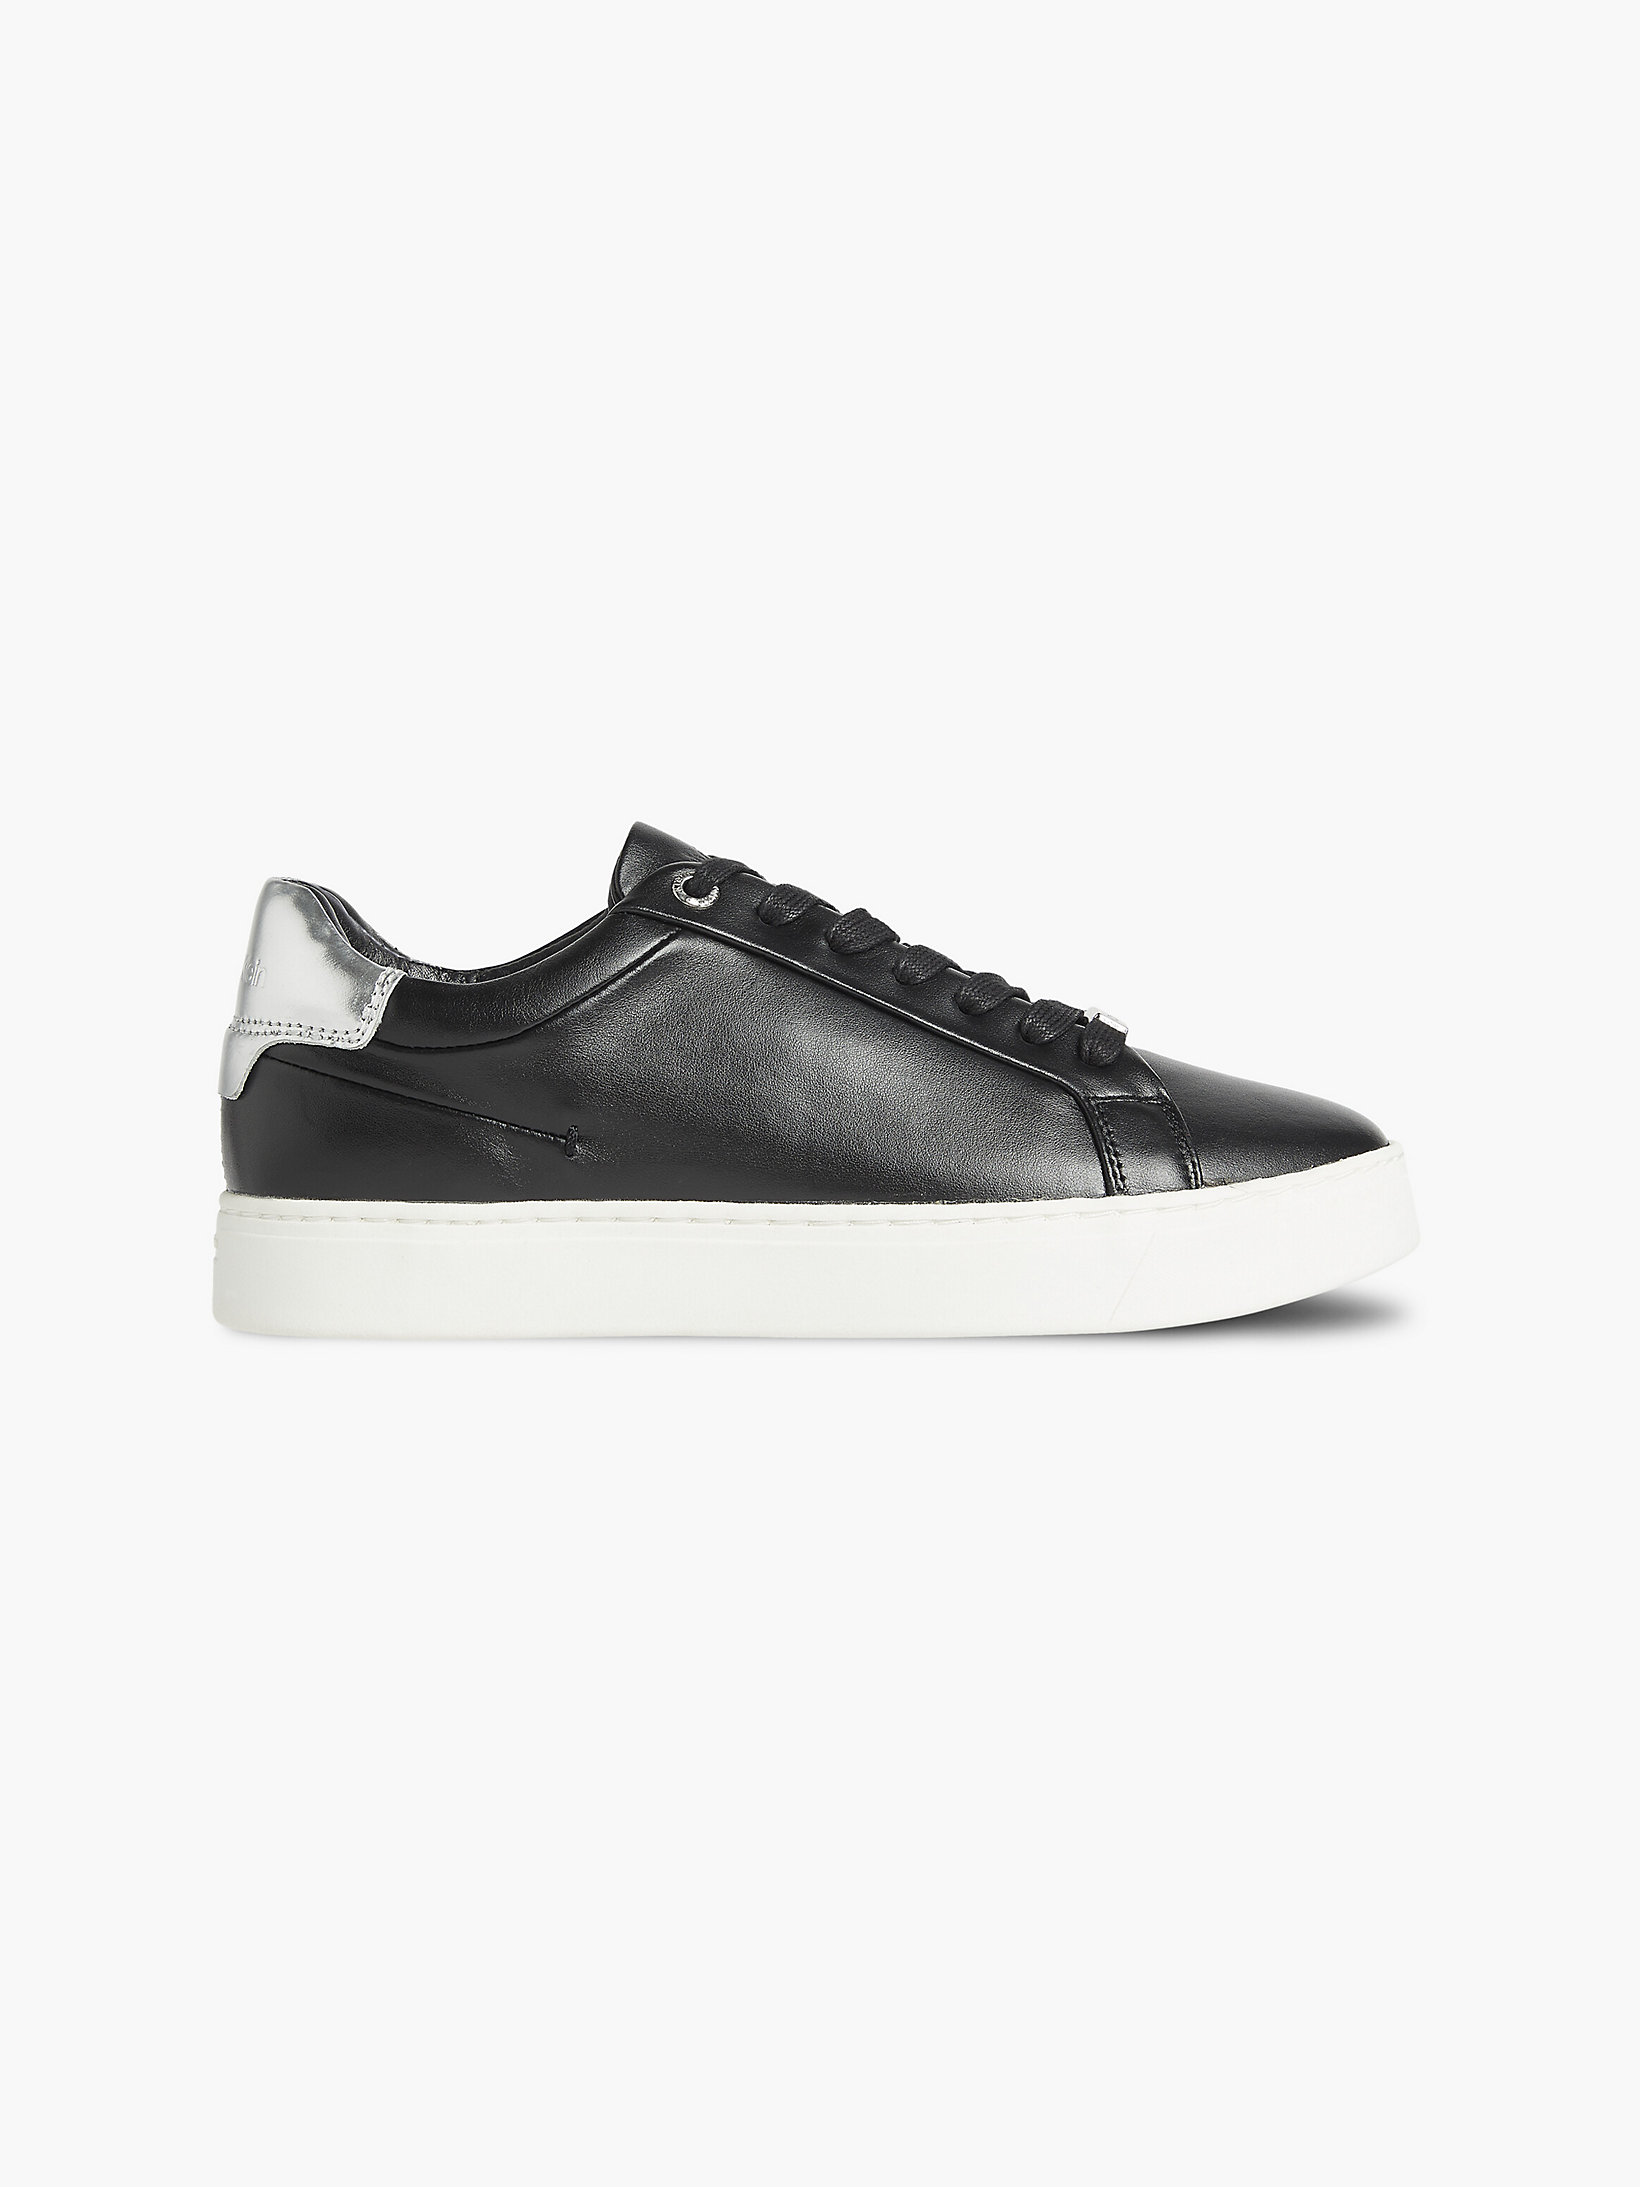 Sneakers In Pelle > Black Silver > undefined donna > Calvin Klein